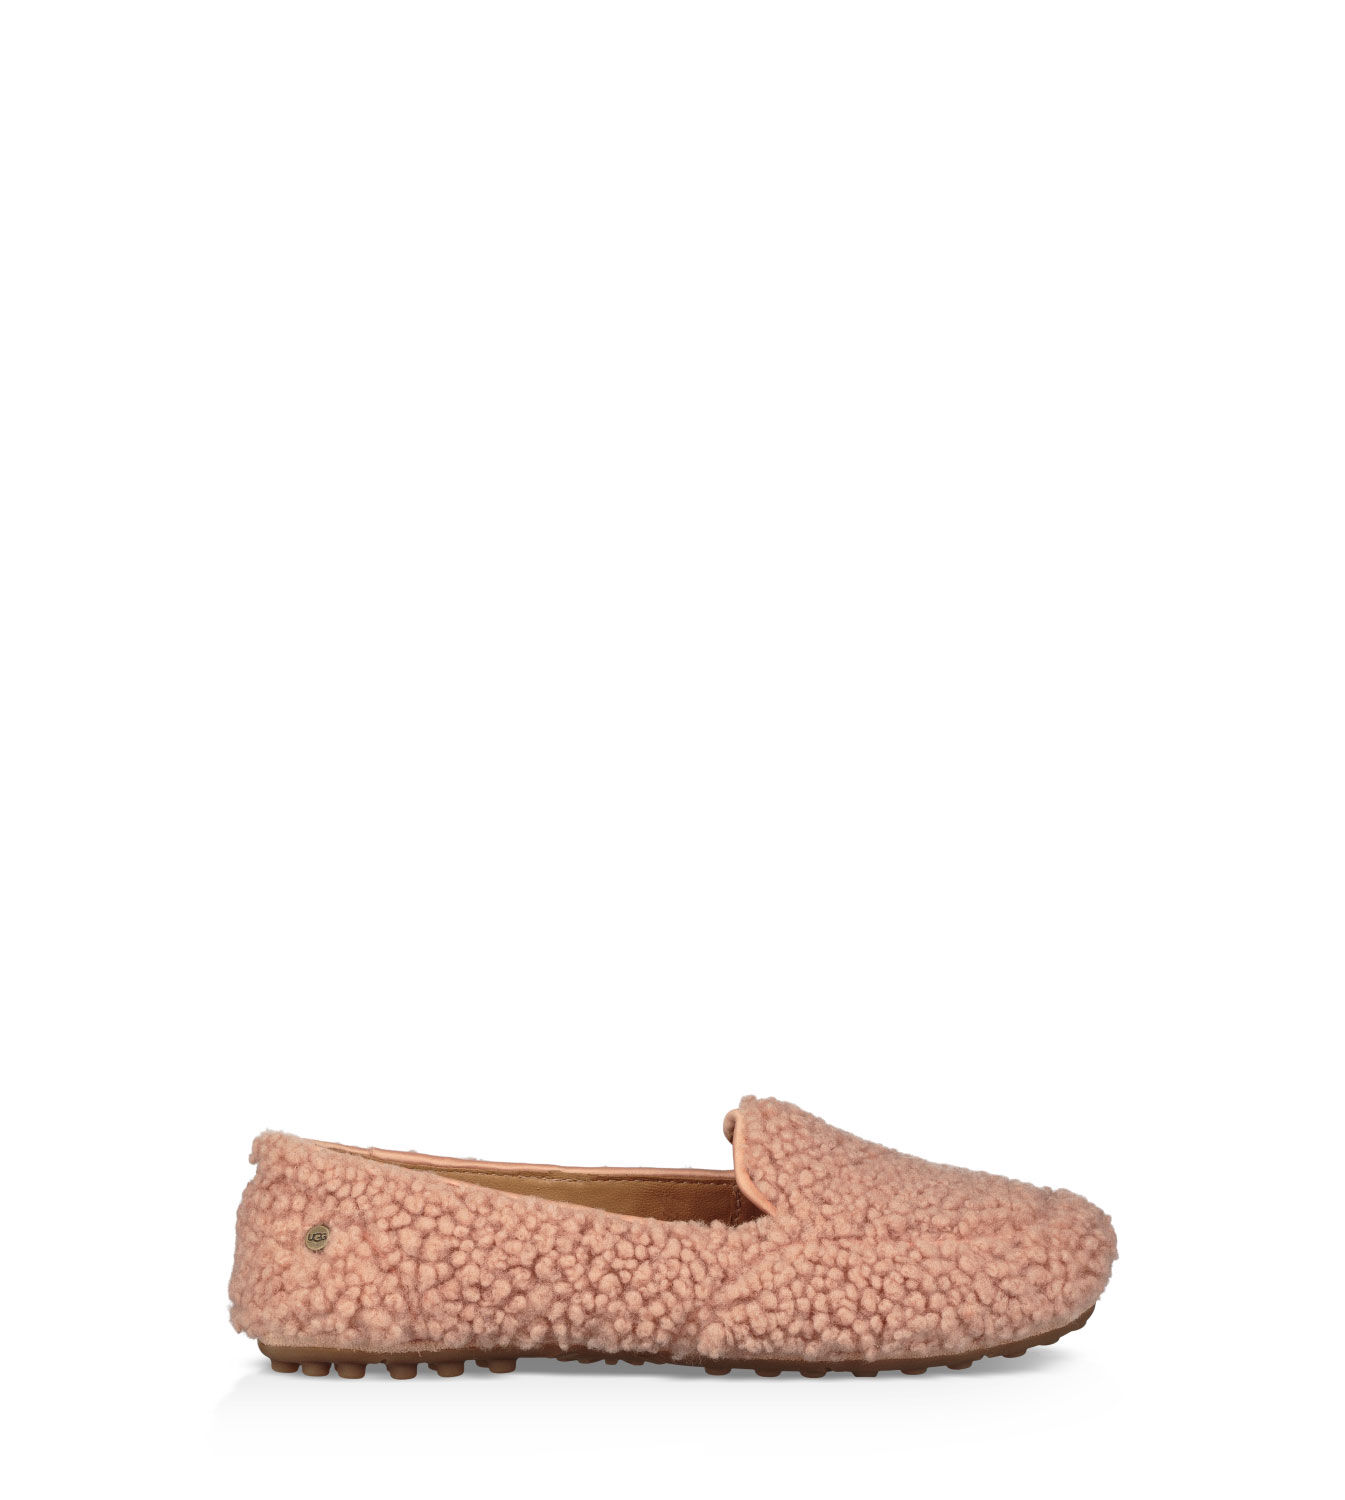 Ugg Hailey Fluff Loafer new Zealand, SAVE 60% - aveclumiere.com